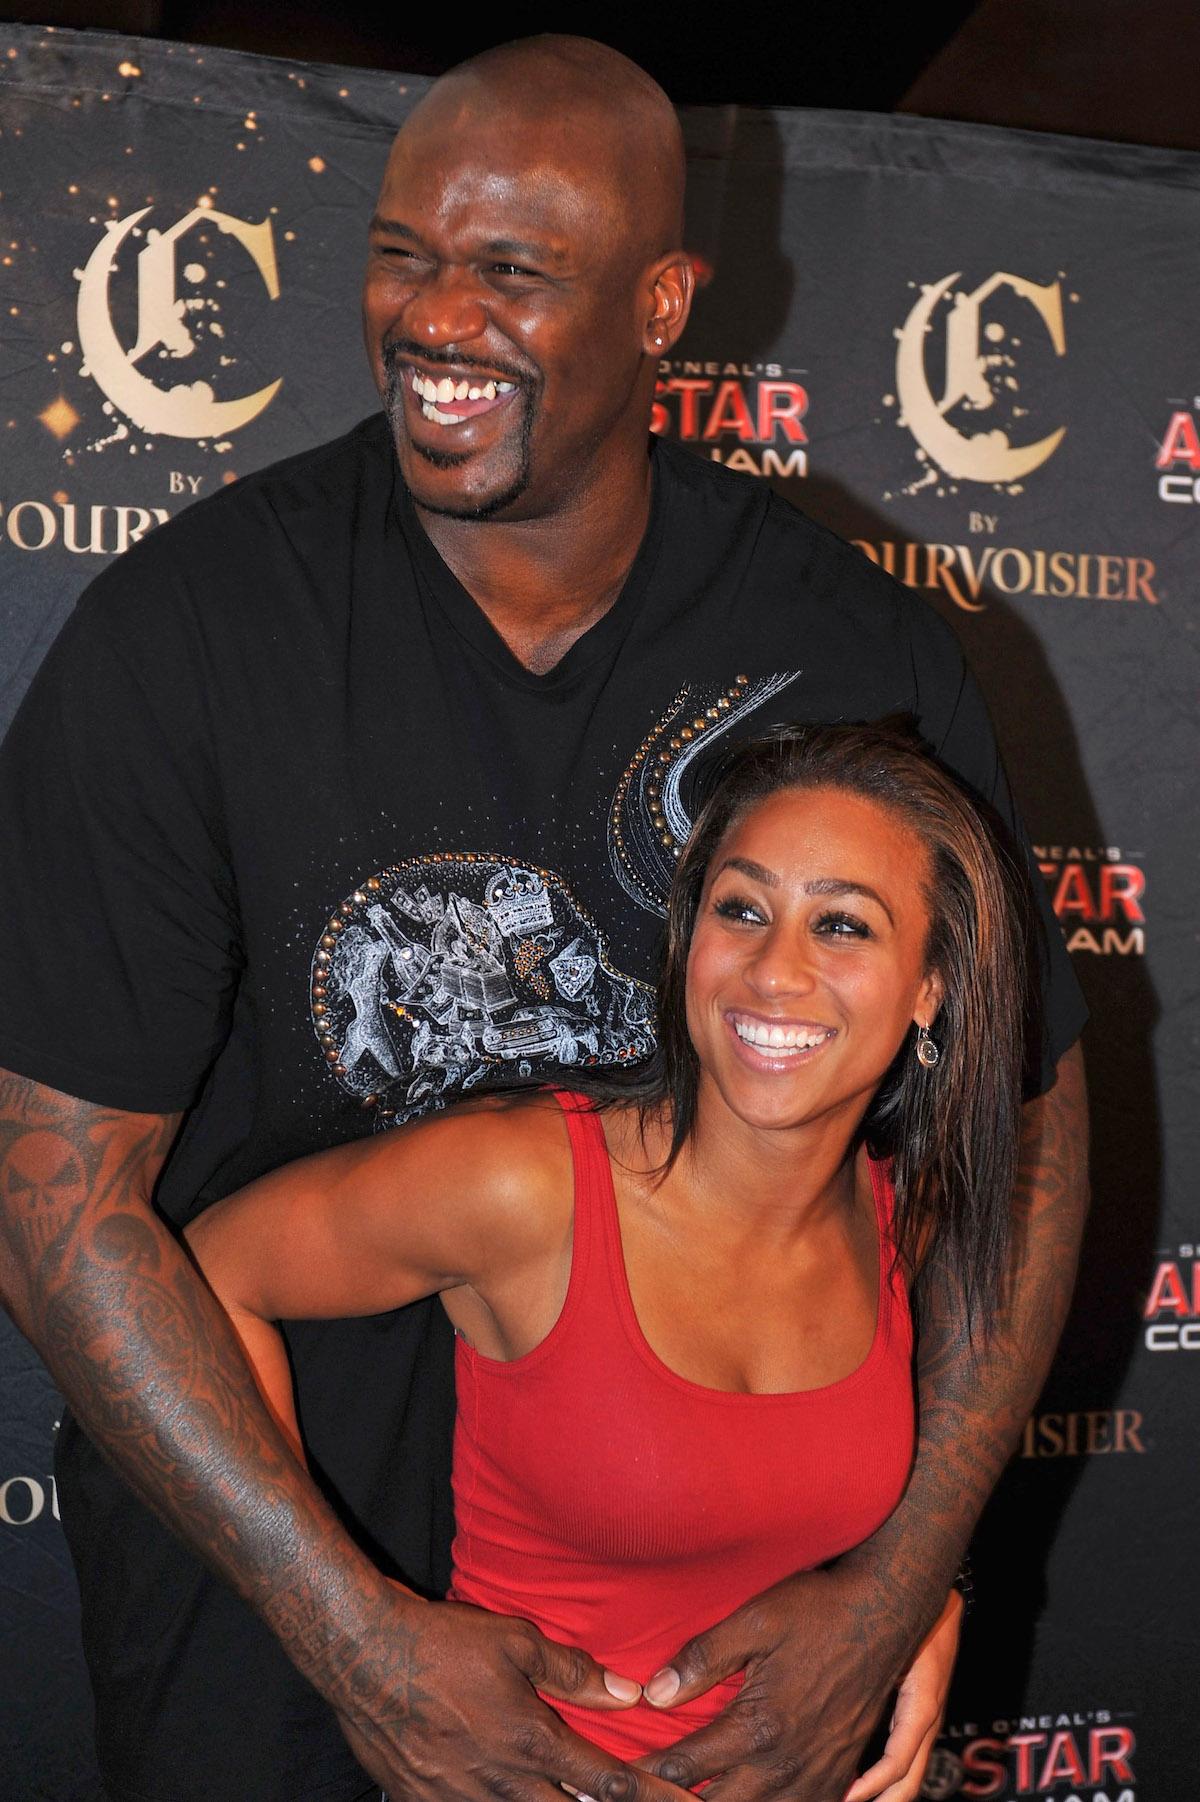 Who Is Shaquille O’Neal’s Girlfriend? You May Recognize Her